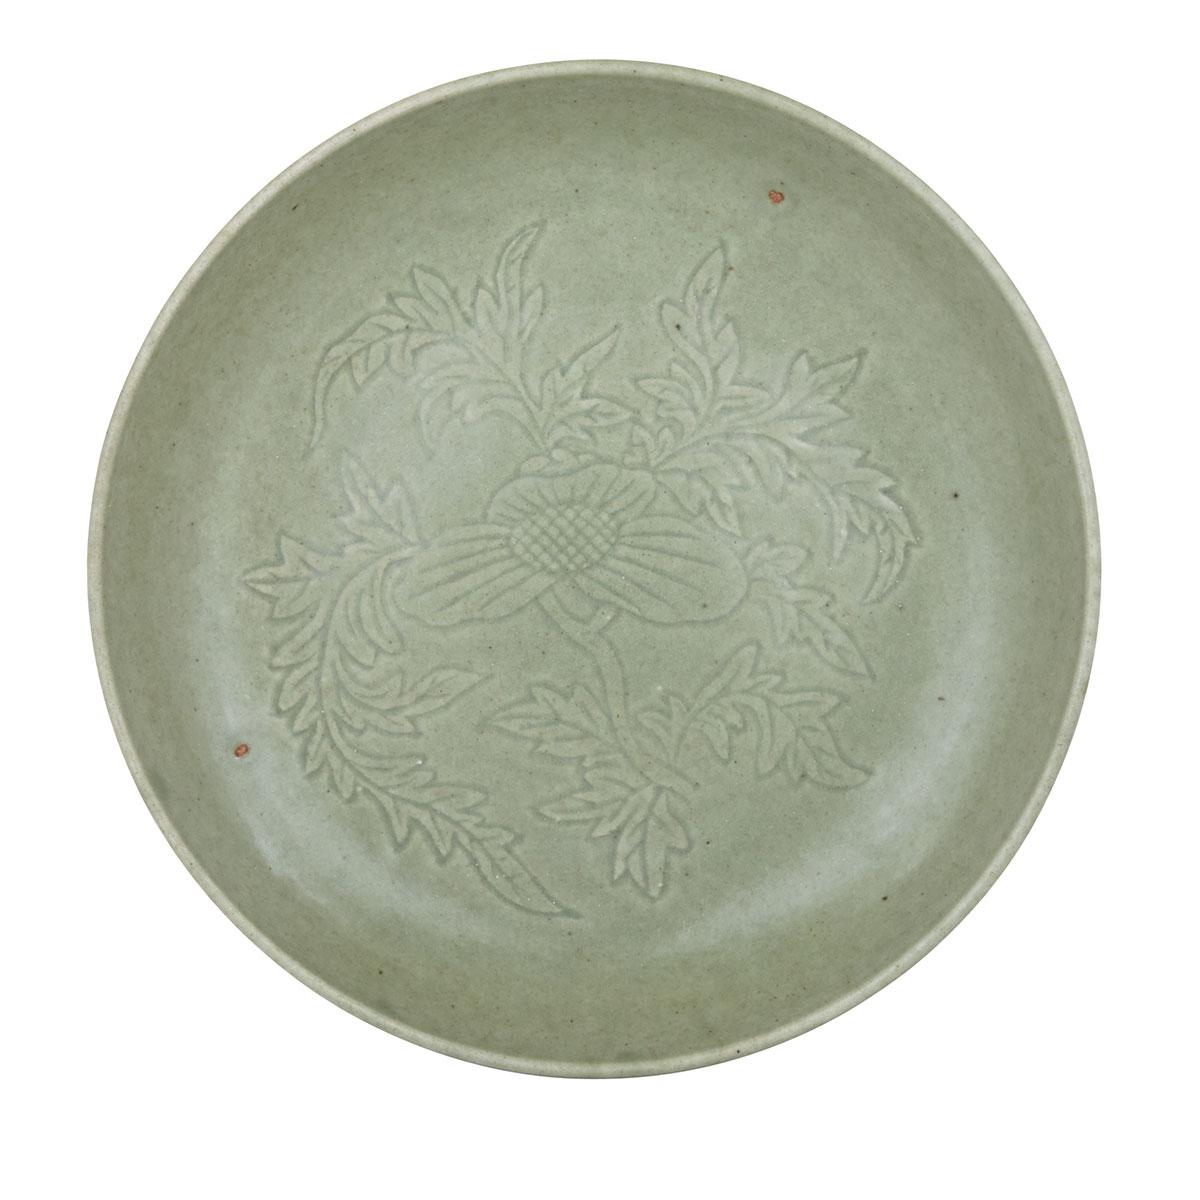 Large Longquan ‘Sunflower’ Charger, Yongle Period (1403-1425)